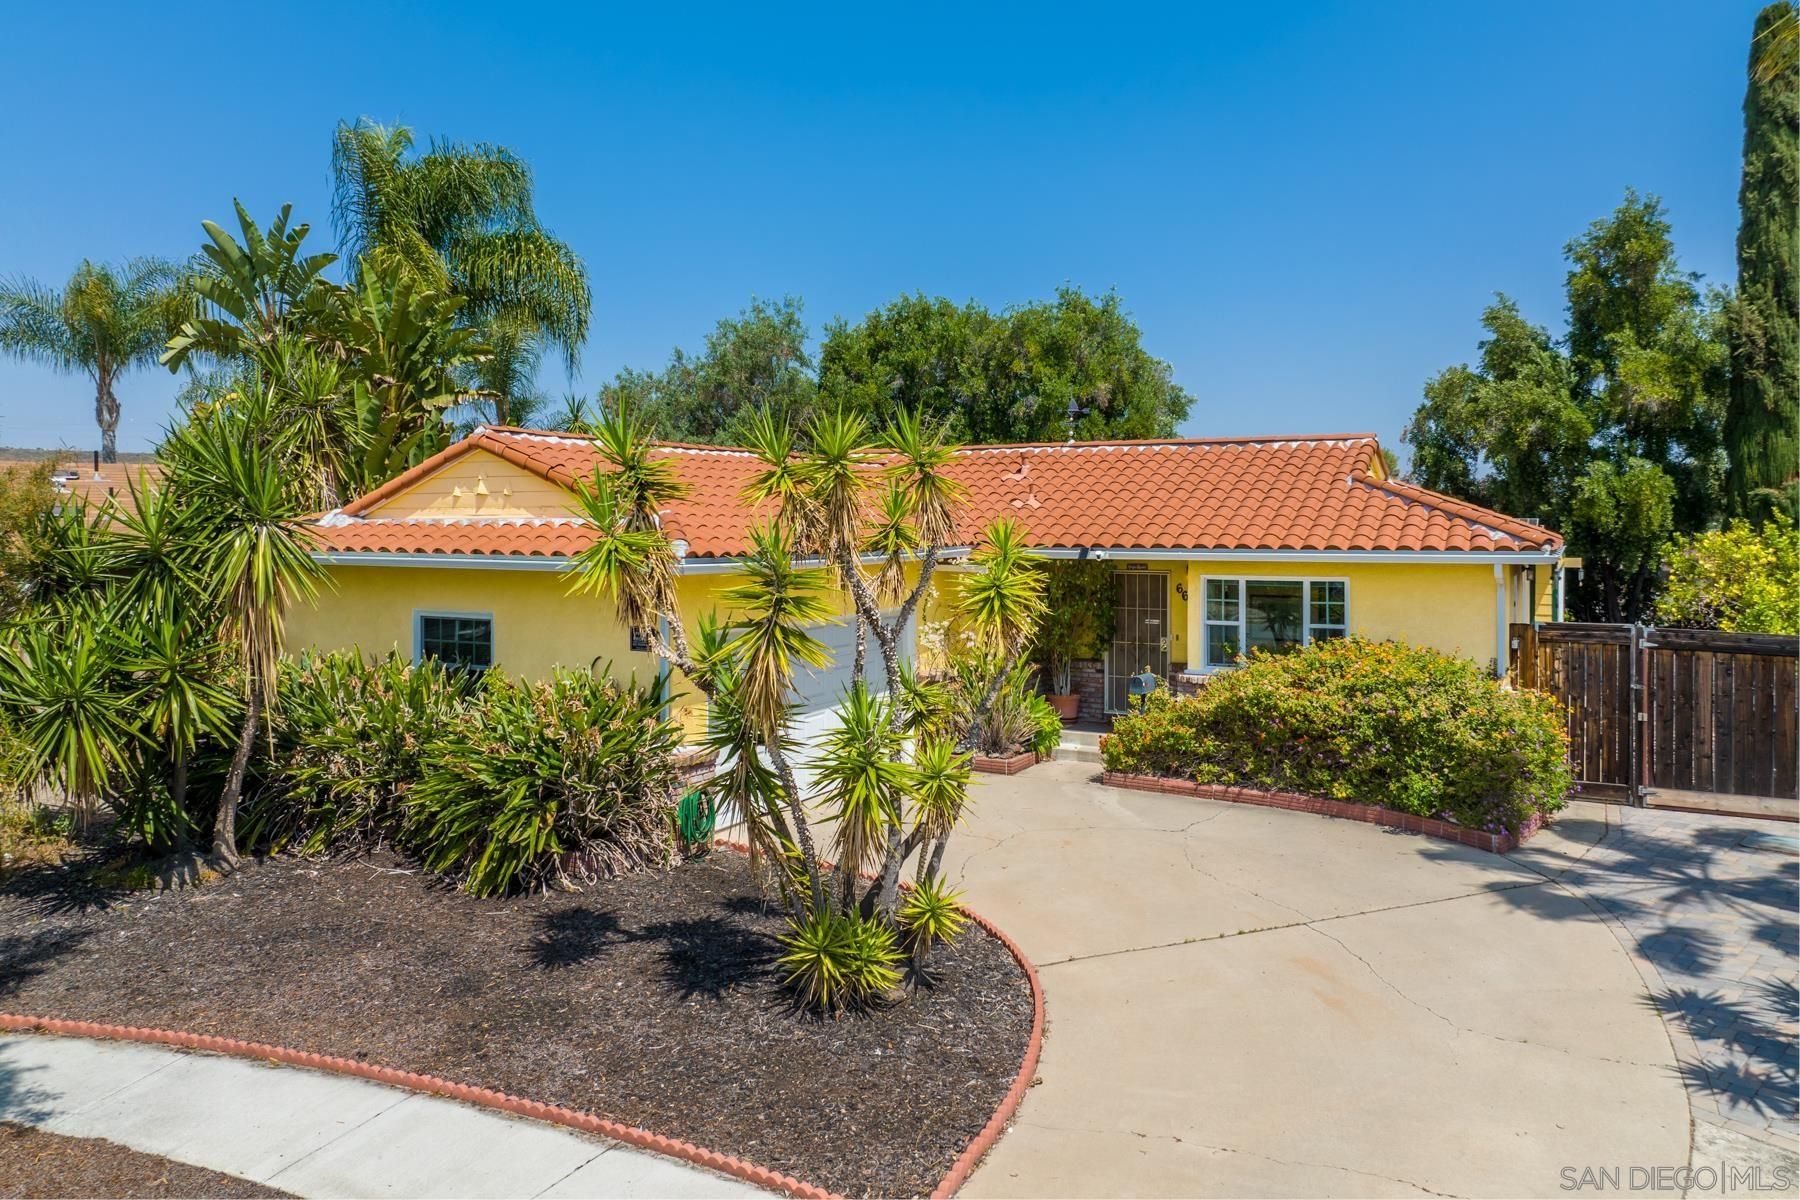 I have sold a property at 6650 SEAMAN ST in San Diego
